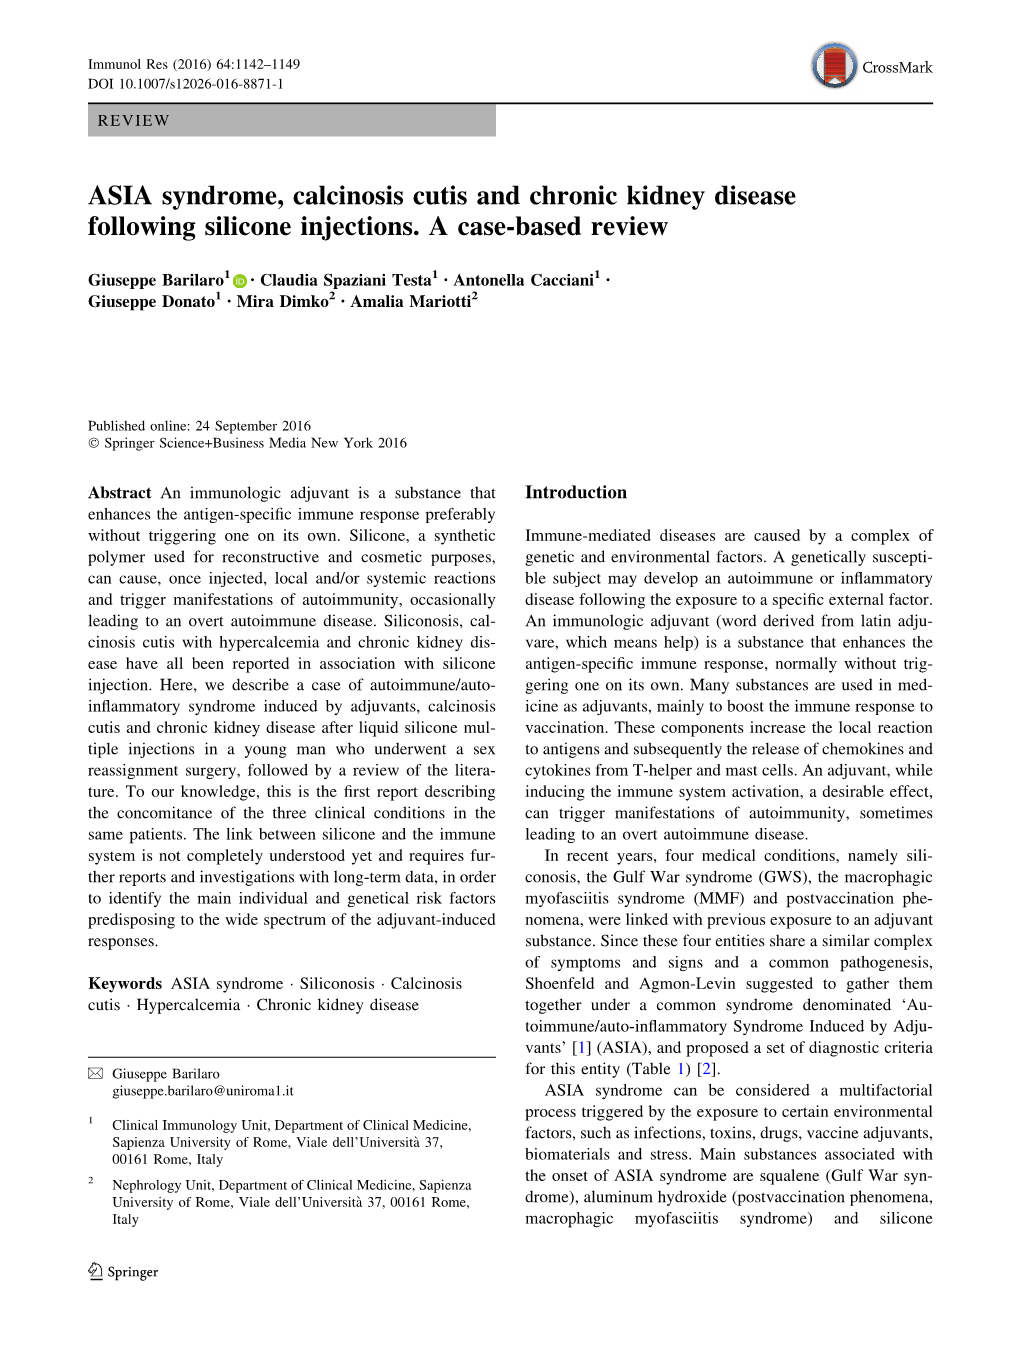 ASIA Syndrome, Calcinosis Cutis and Chronic Kidney Disease Following Silicone Injections